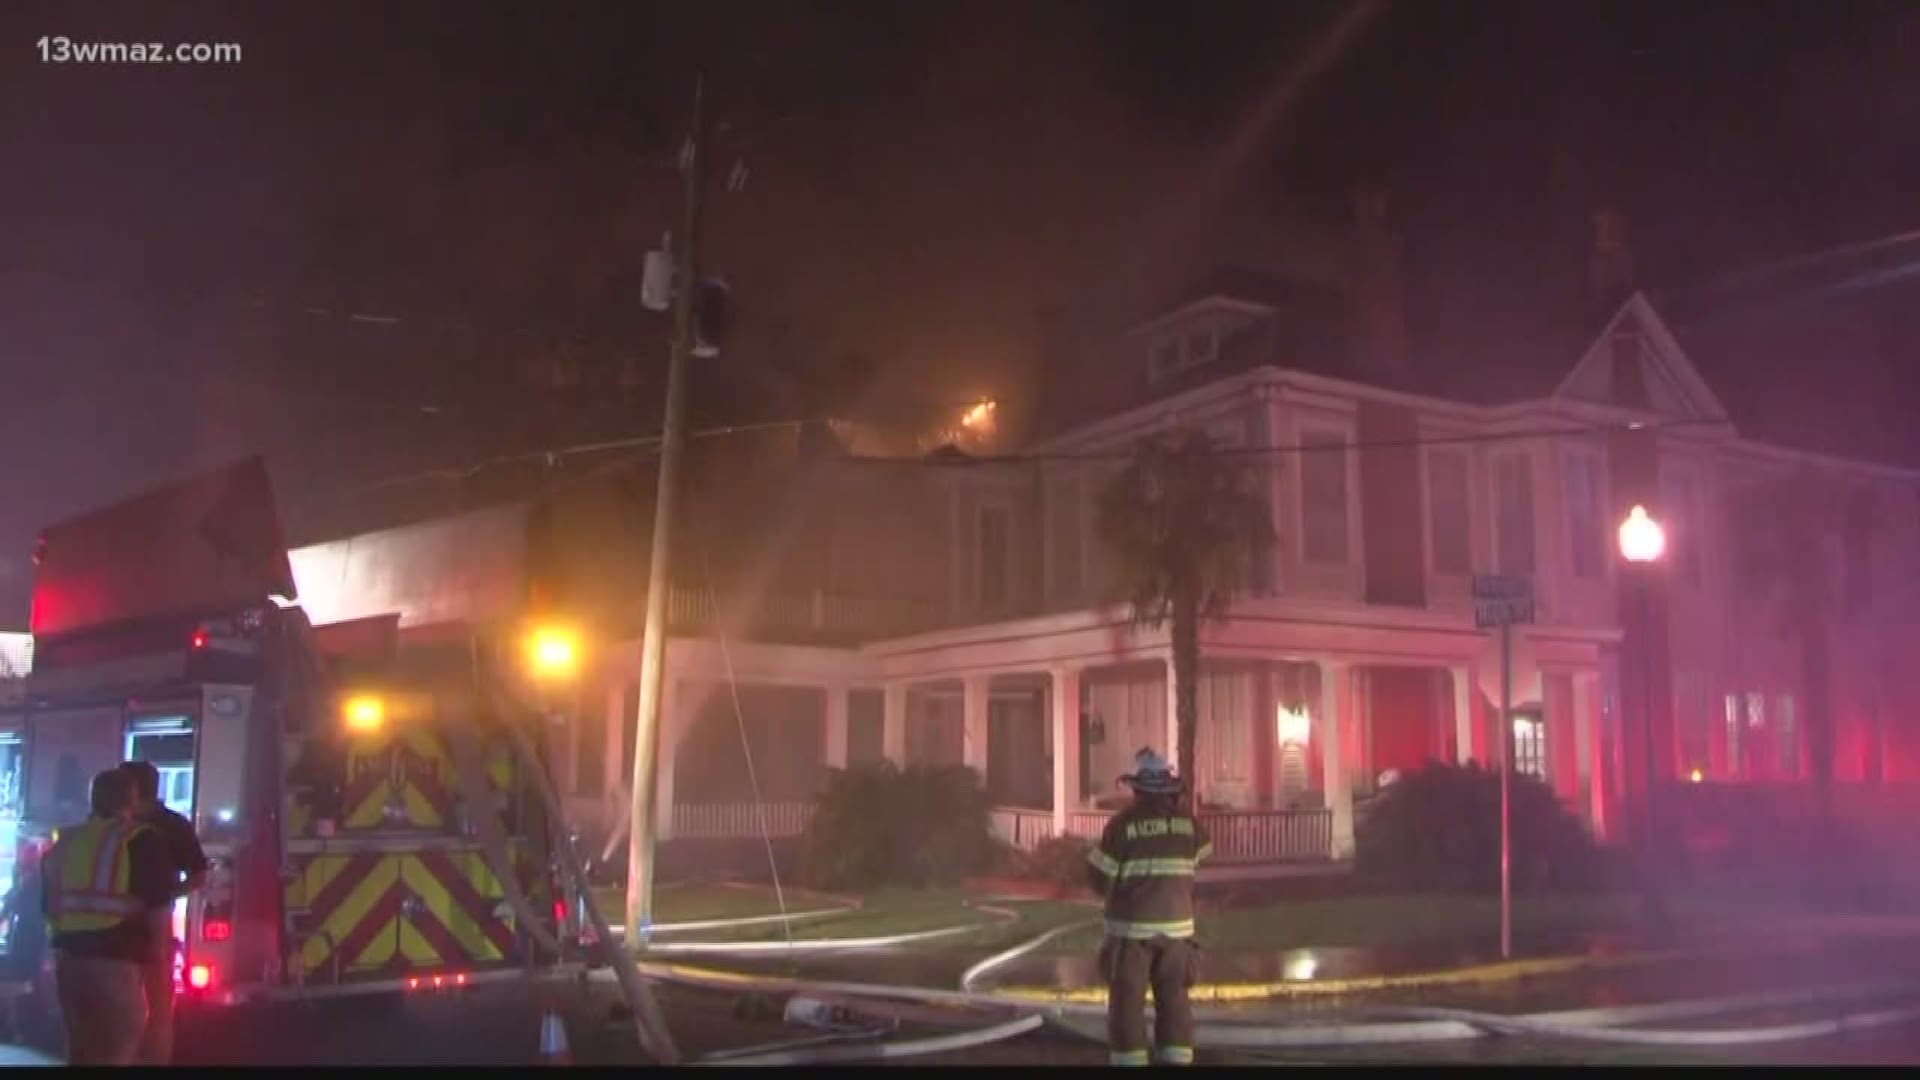 The Macon-Bibb Fire Department battled a fire Wednesday night that damaged three historic homes in downtown Macon and injured five firefighters. The fire happened on Orange in High Streets.